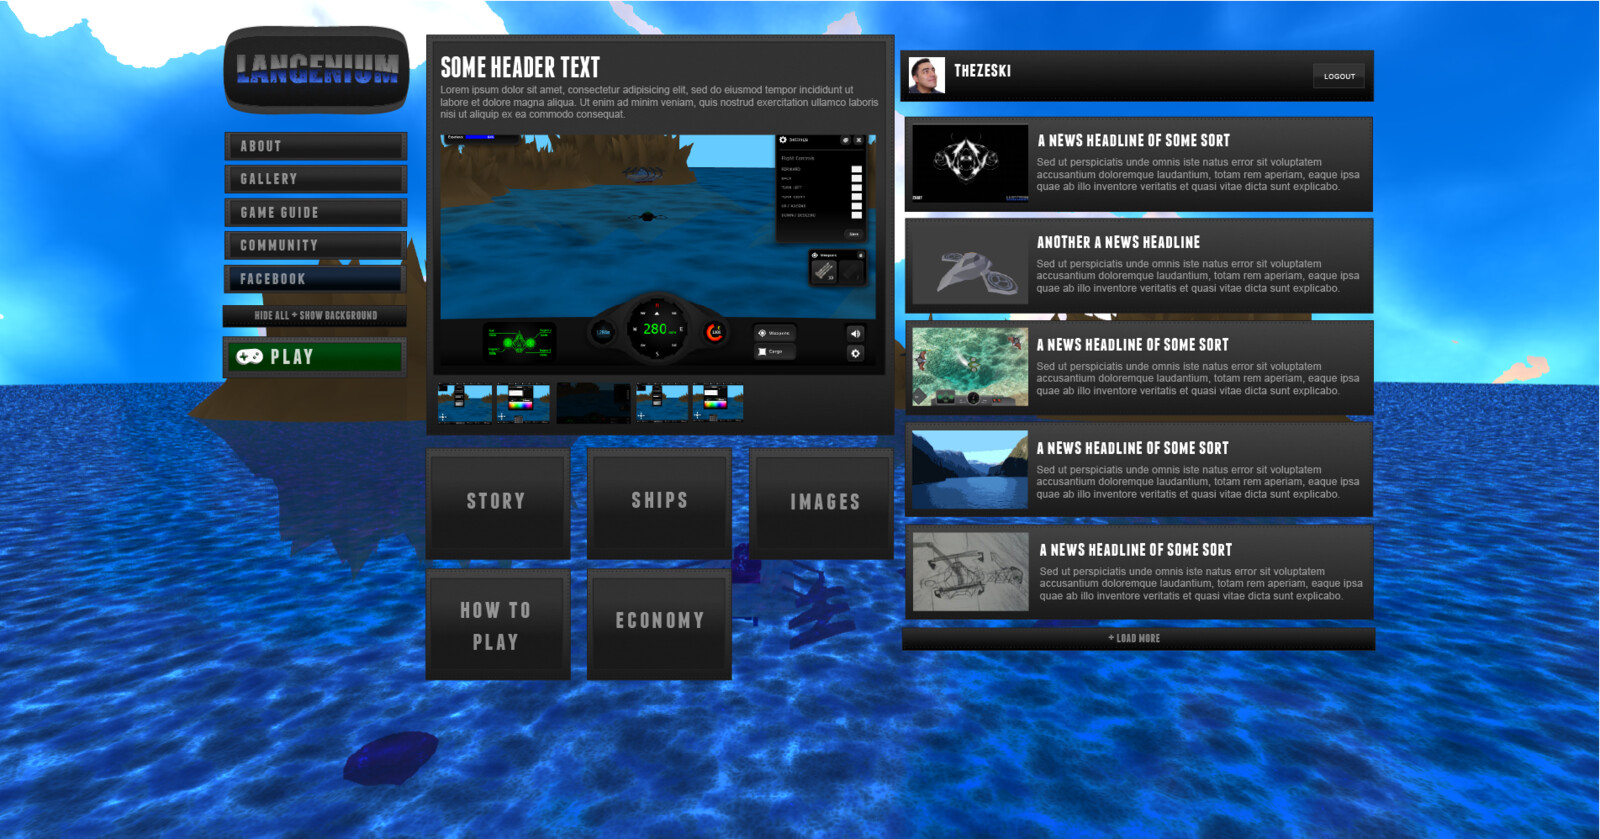 Design concept of the website using the game engine as a background.